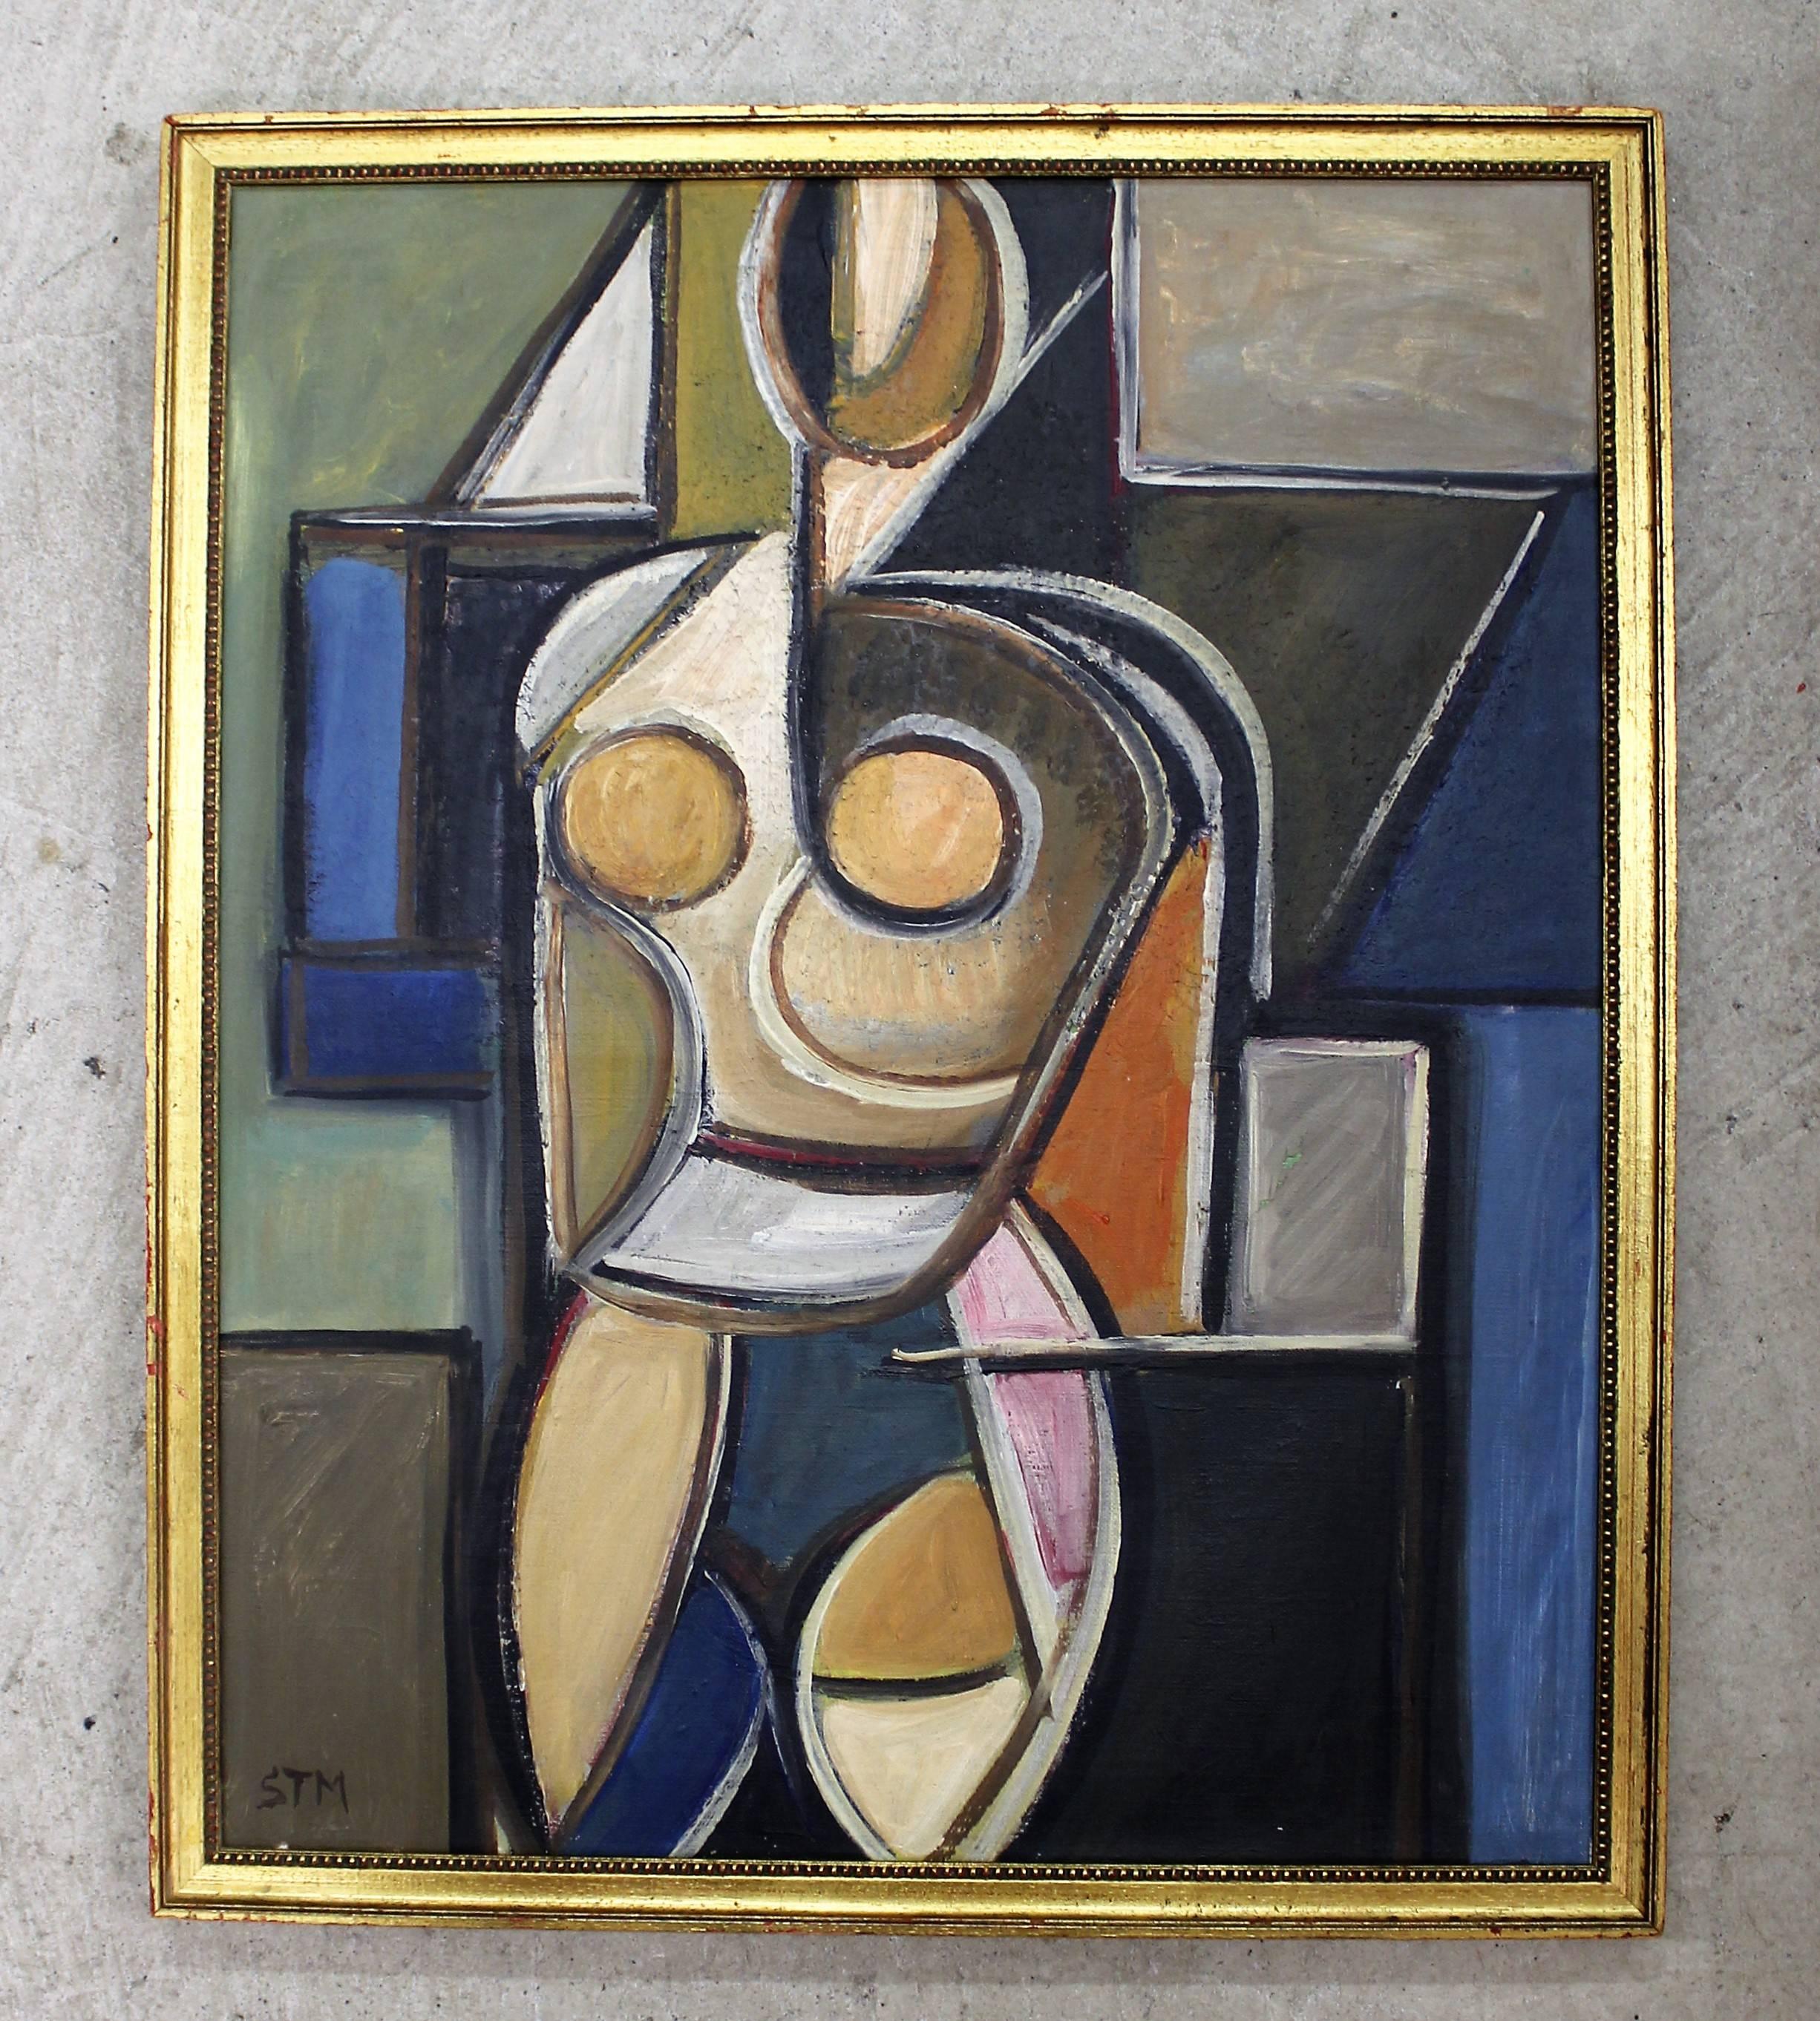 Josef Stoitzner Millinger (Austrian, 1911-1982) Cubist painting
Measures: With frame: 20.75" wide x 25" high Without frame: 19.5" wide x 23.5" high.